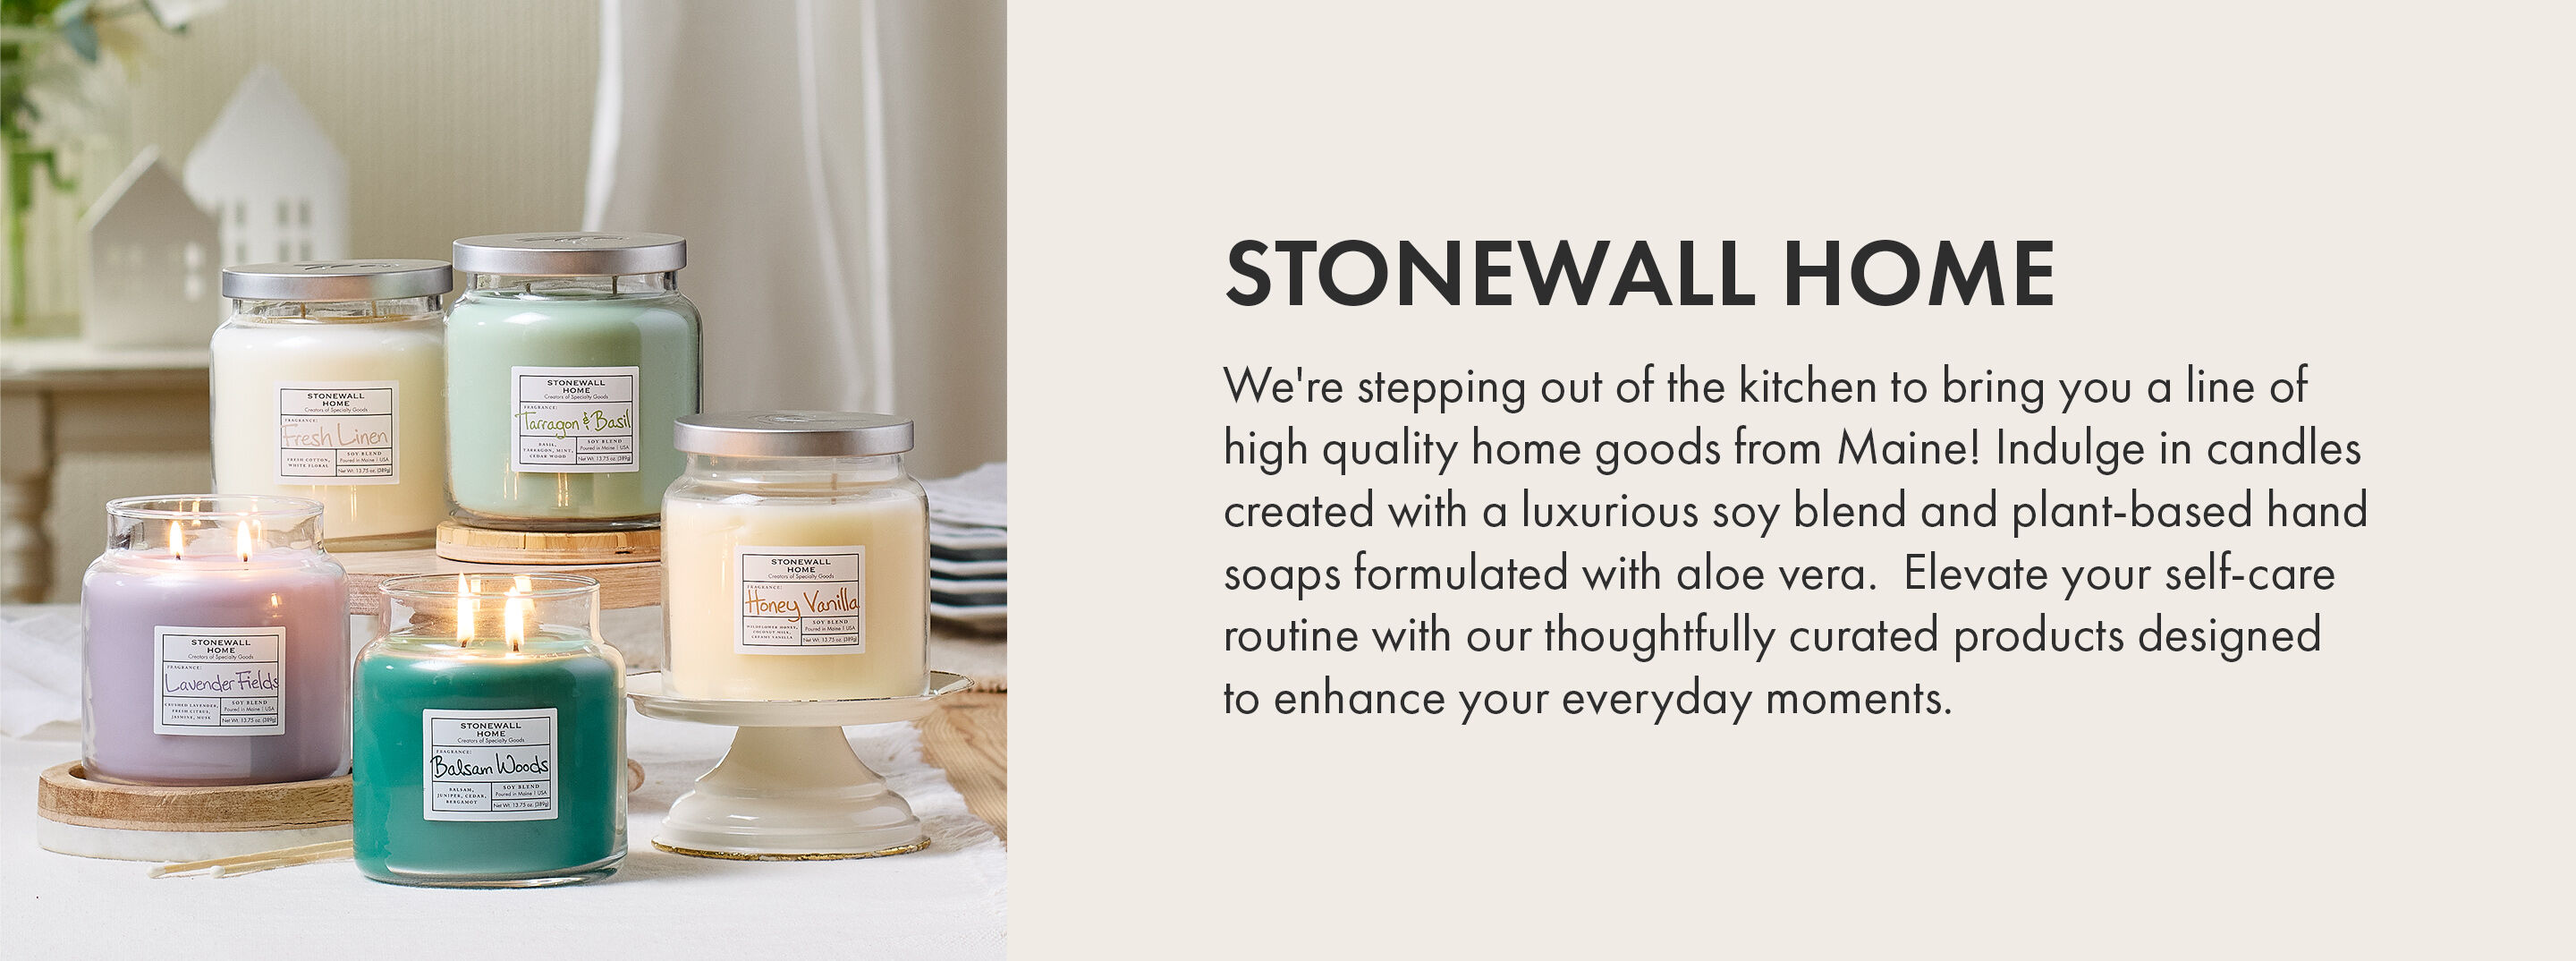 Stonewall Home | We're stepping out of the kitchen to bring you a line of high quality home goods from Maine! Indulge in candles created with a luxurious soy blend, diffusers and room sprays with captivating fragrances, and plant-based hand soaps formulated with aloe vera.